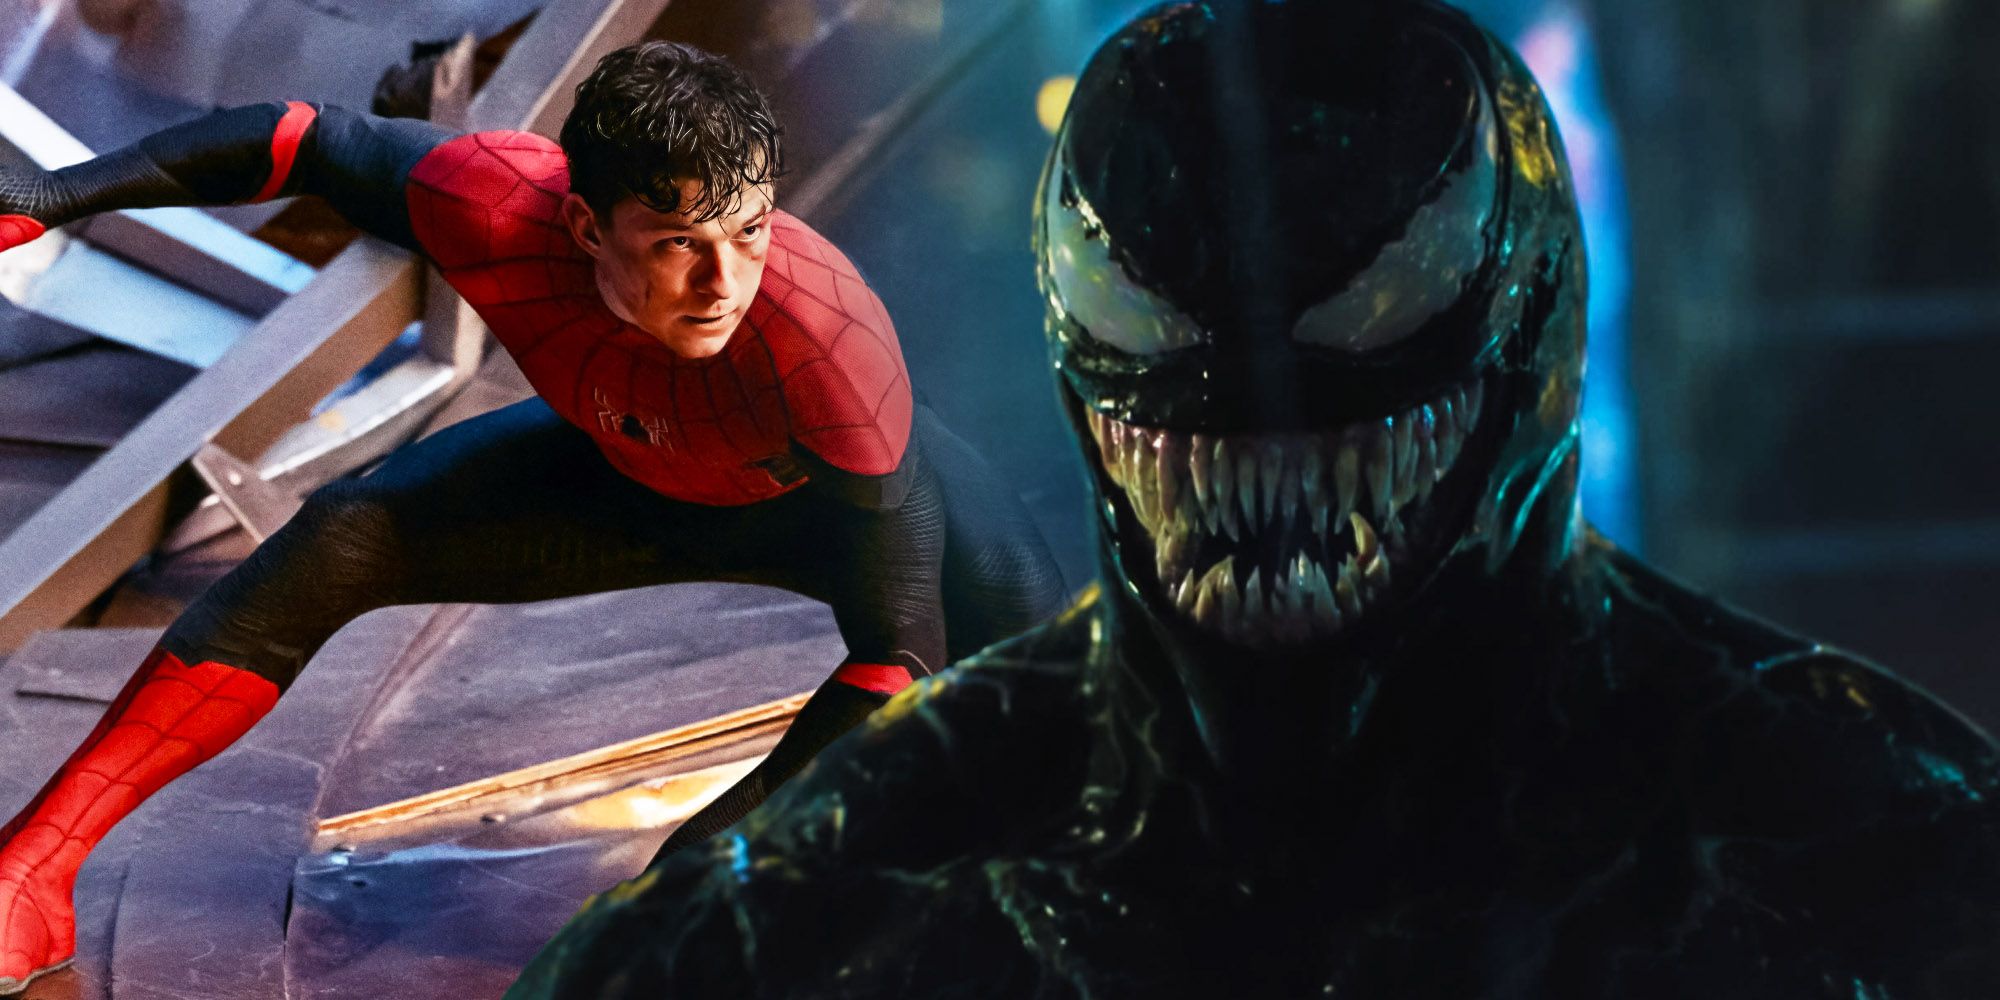 Epic Avengers Art Imagines Tom Holland Becoming Symbiote Spider-Man